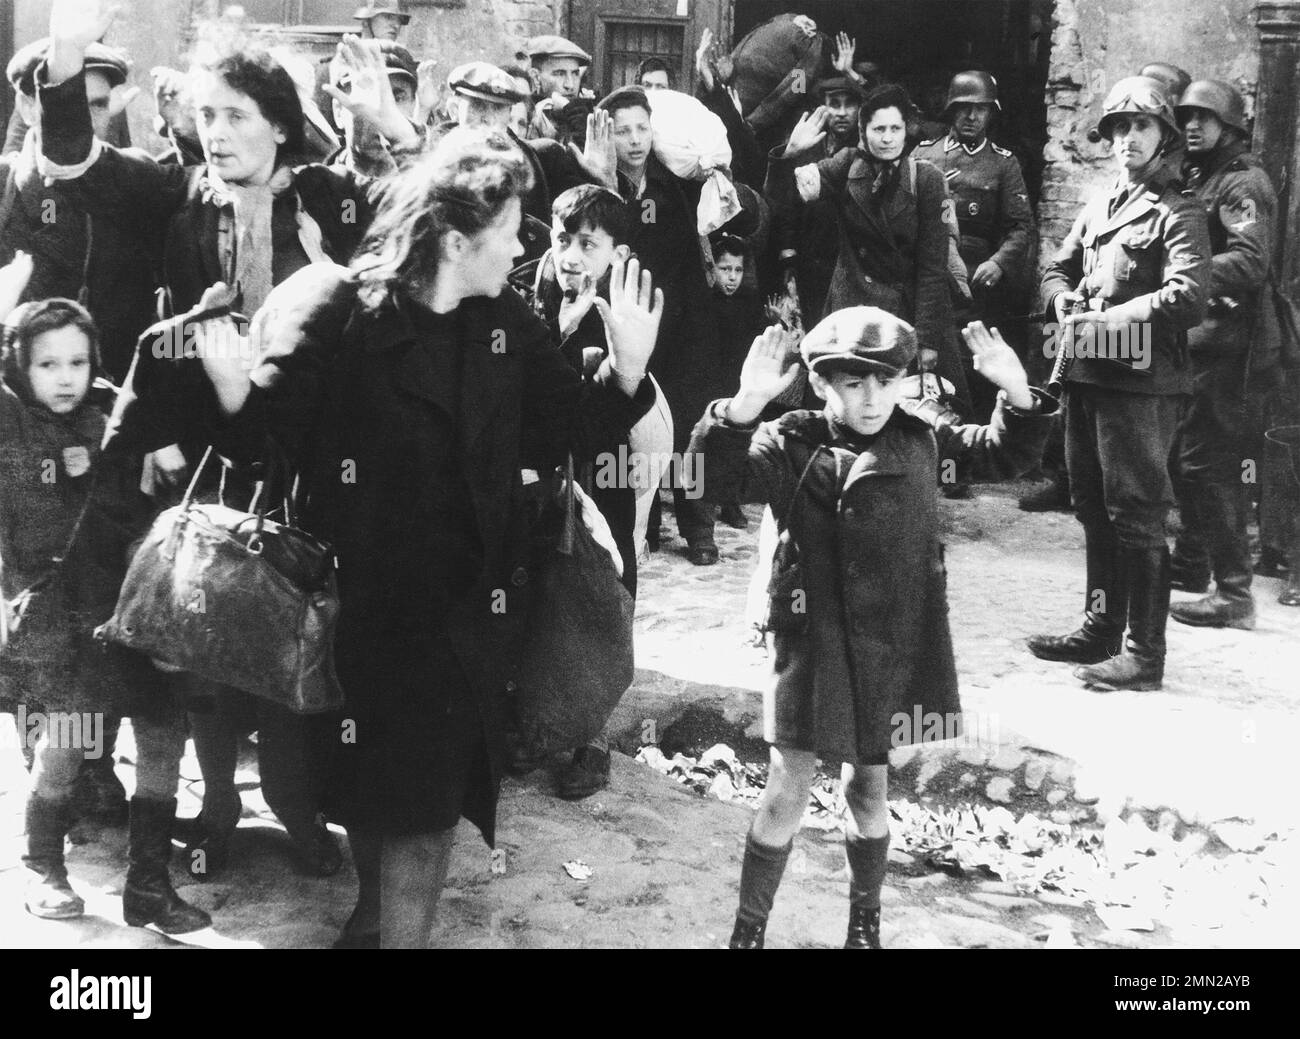 WARSAW GHETTO UPRISING  1943,  At right with submachine gun is SS-Rottenführer Josef Blosche. Others including the boy have not been identified with certainty. Stock Photo